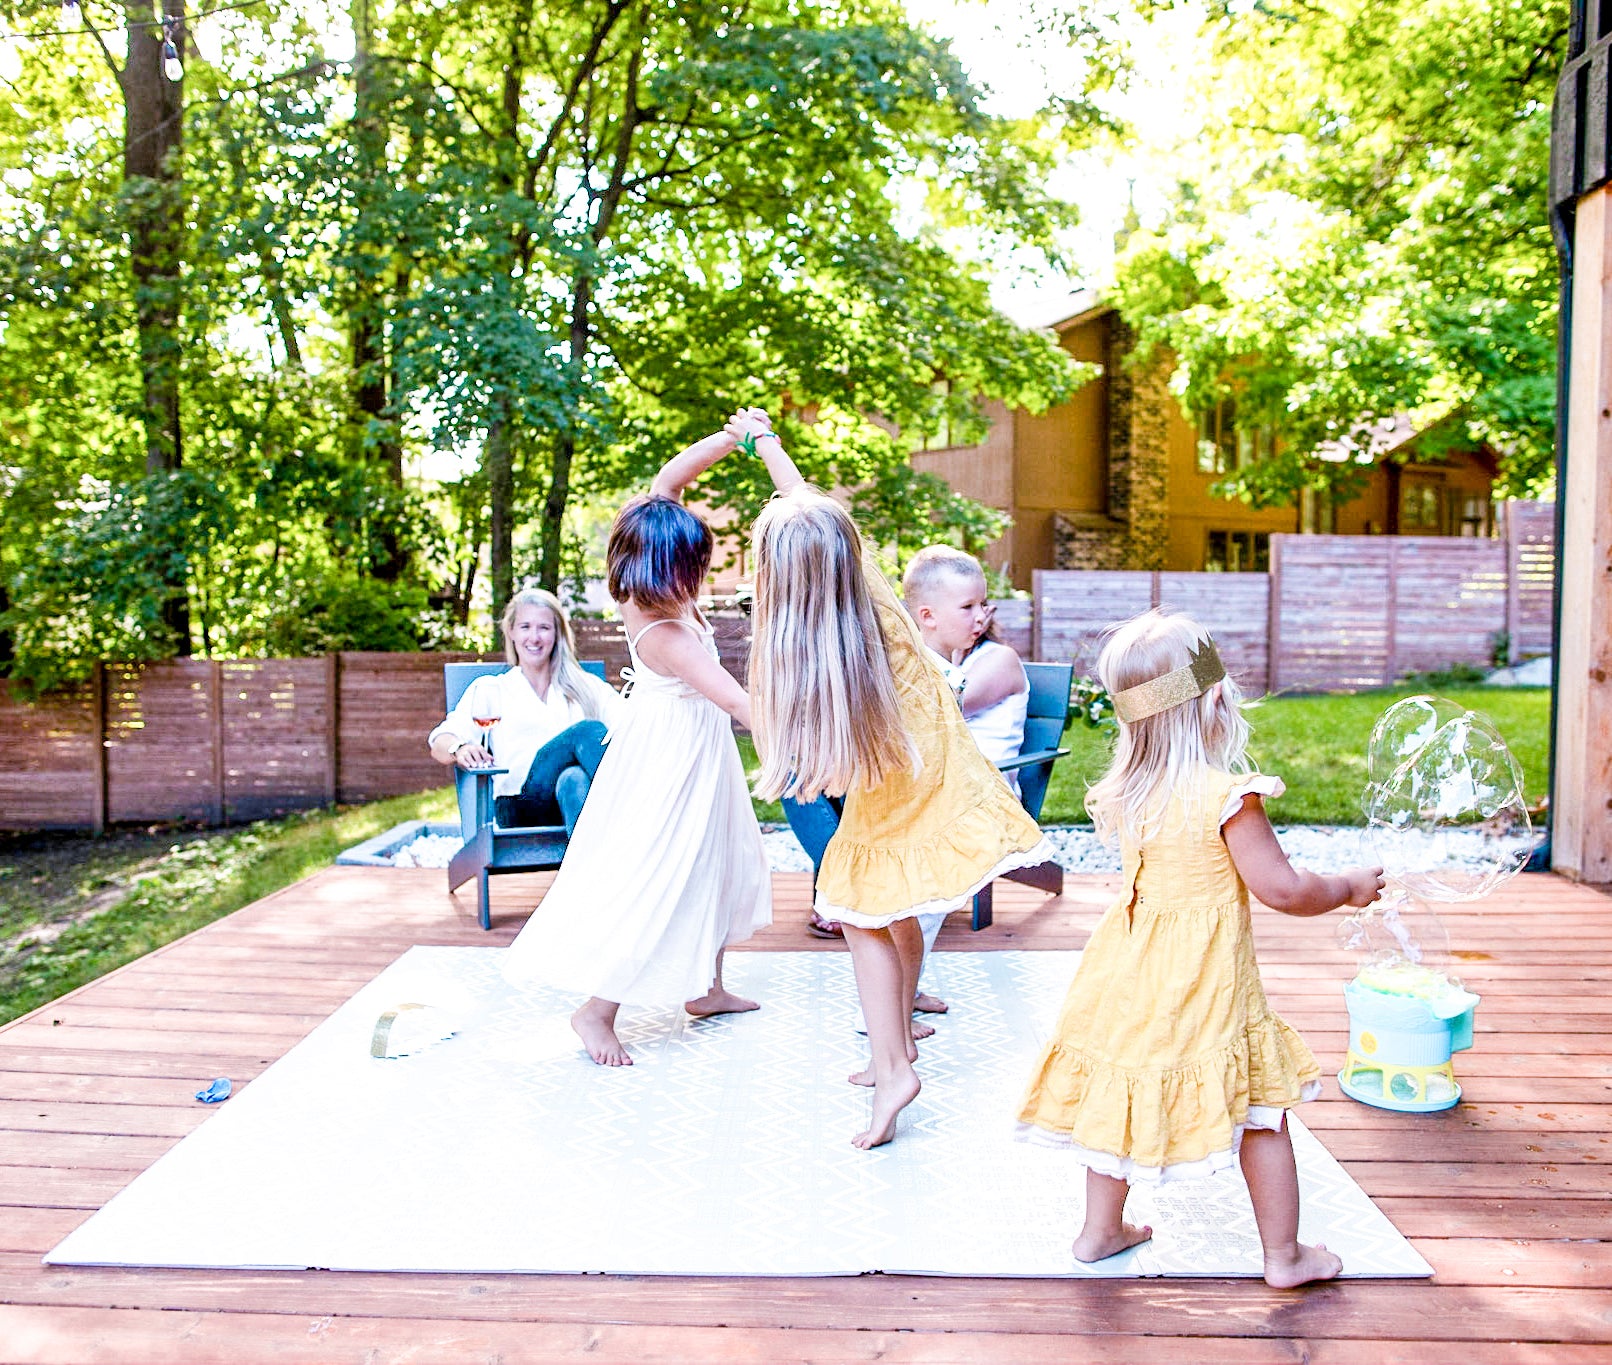 How to Plan the Perfect Play Date For Your Kids